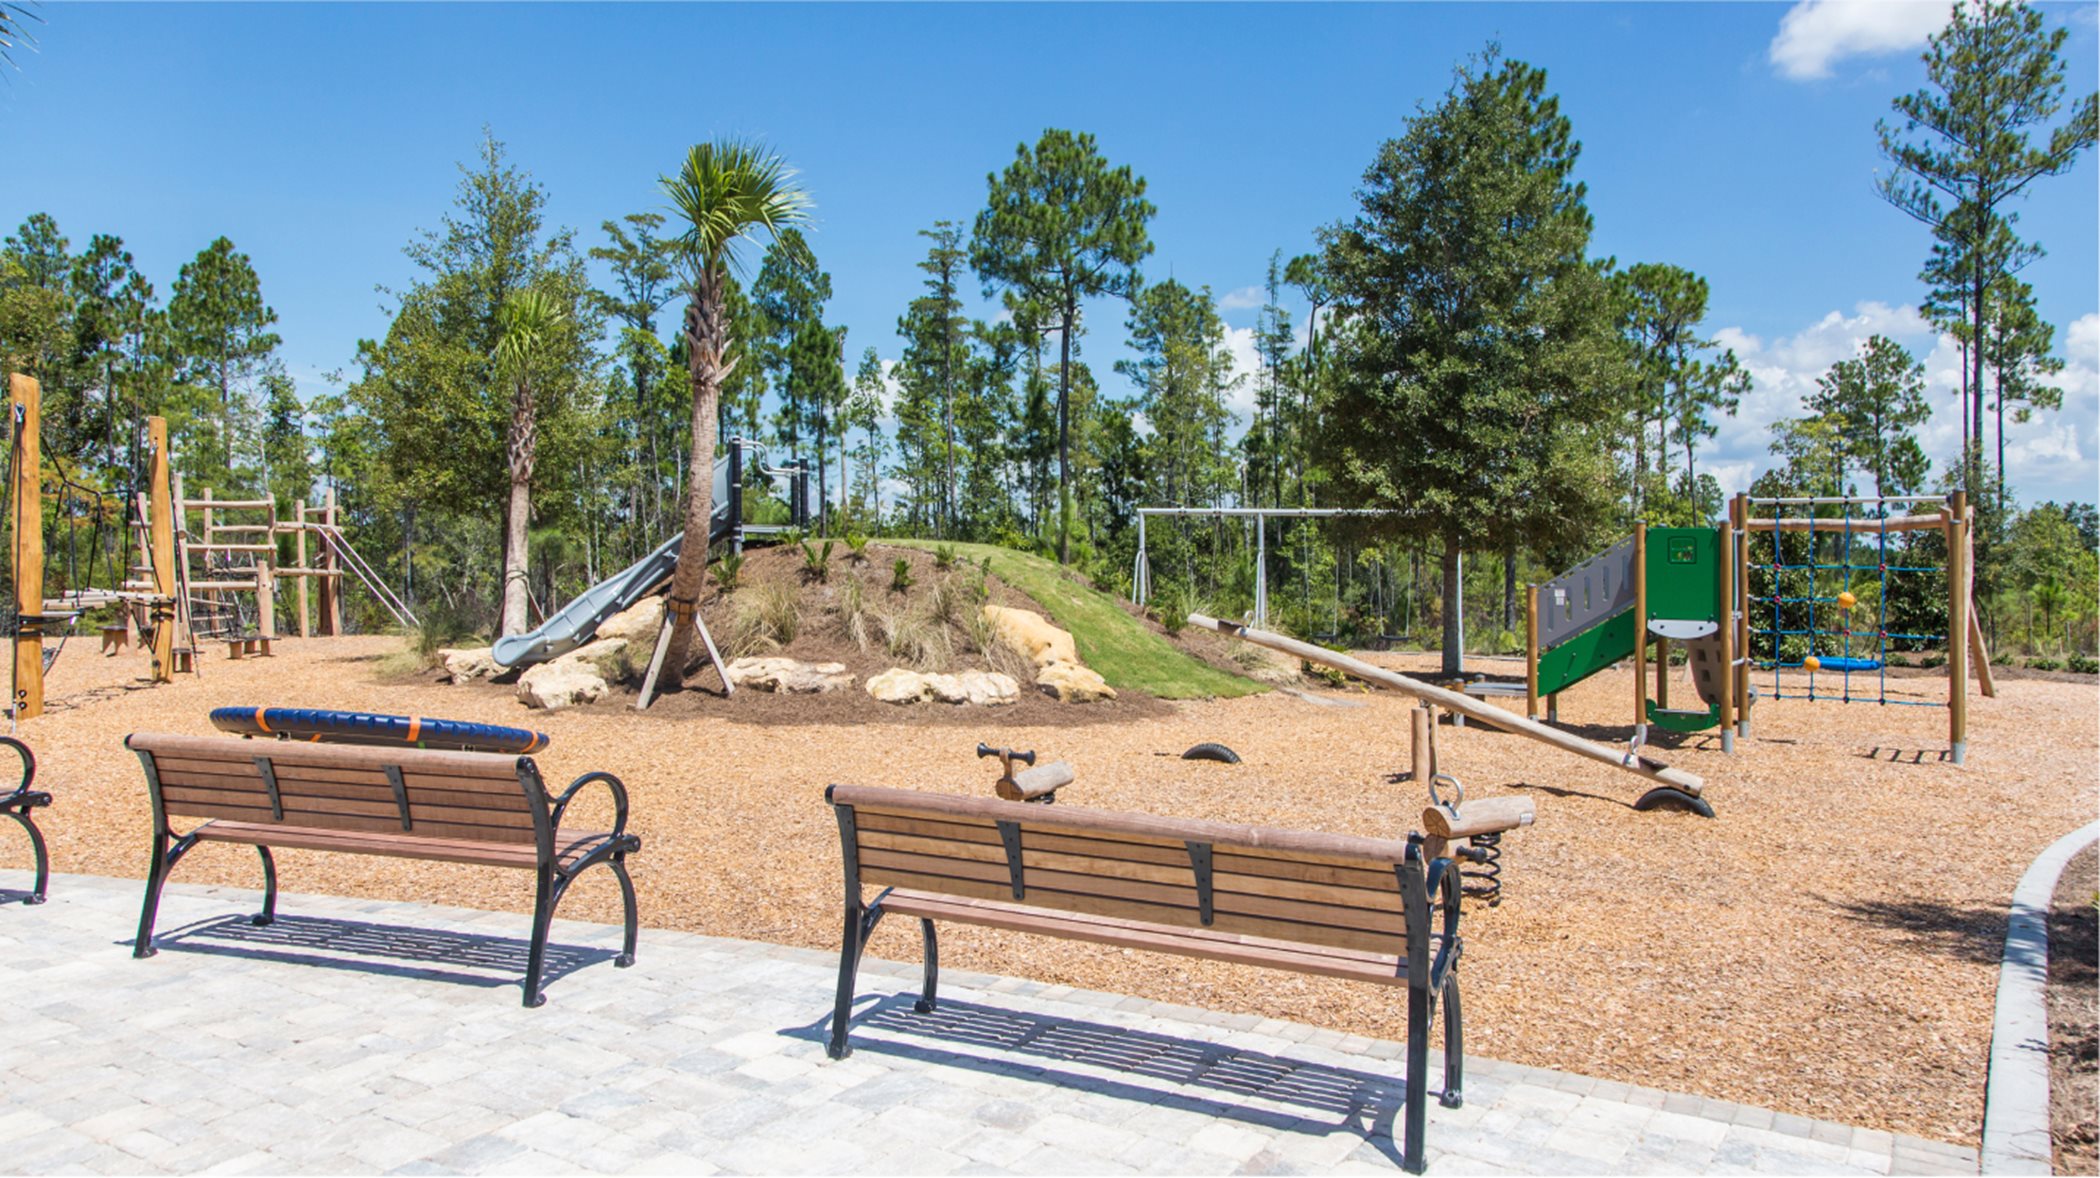 Benches facing the playground